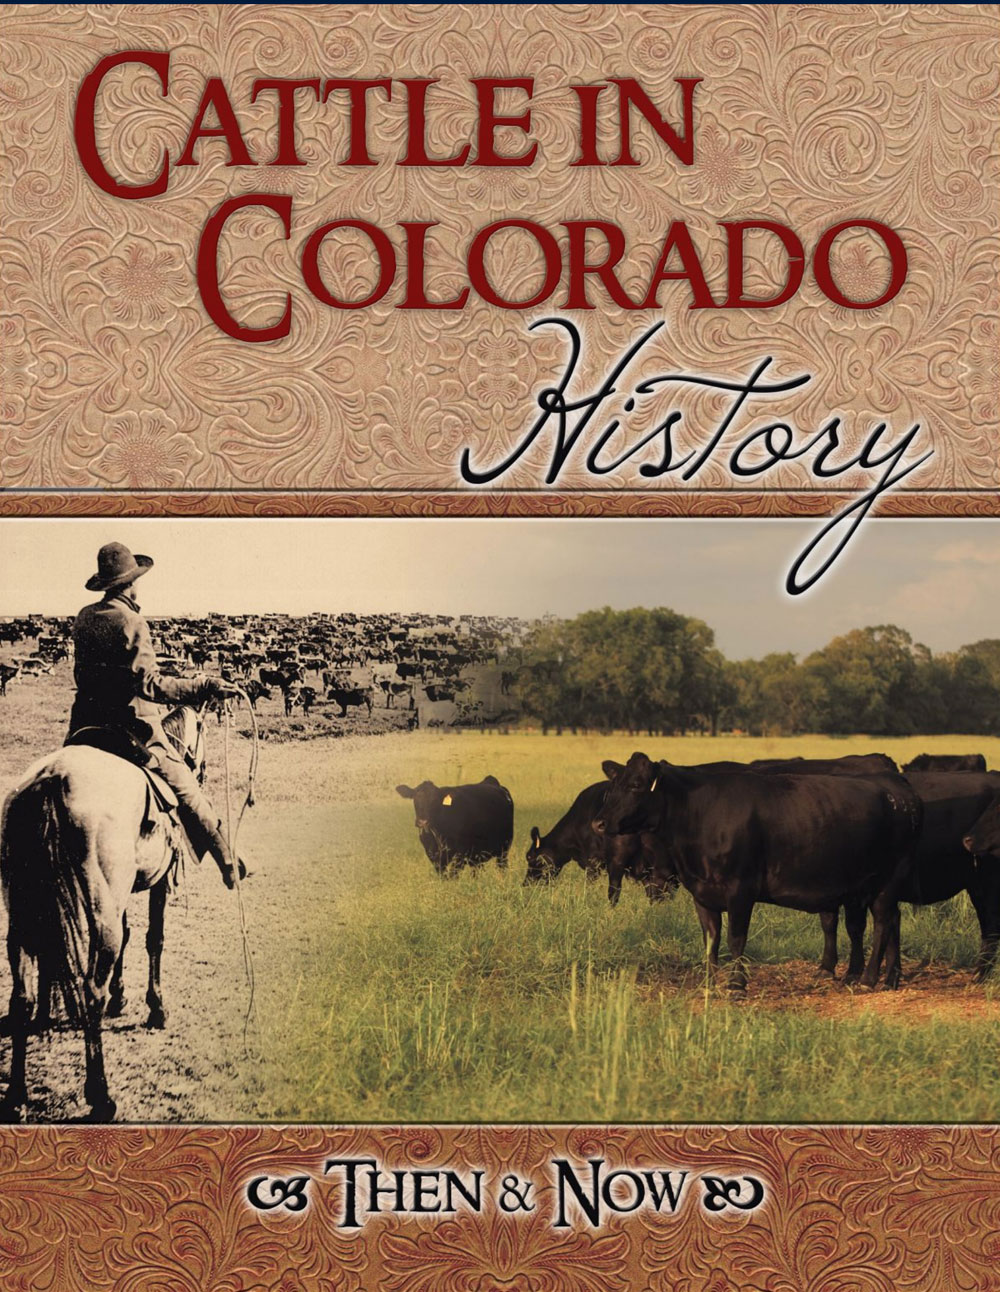 Cattle in Colorado History